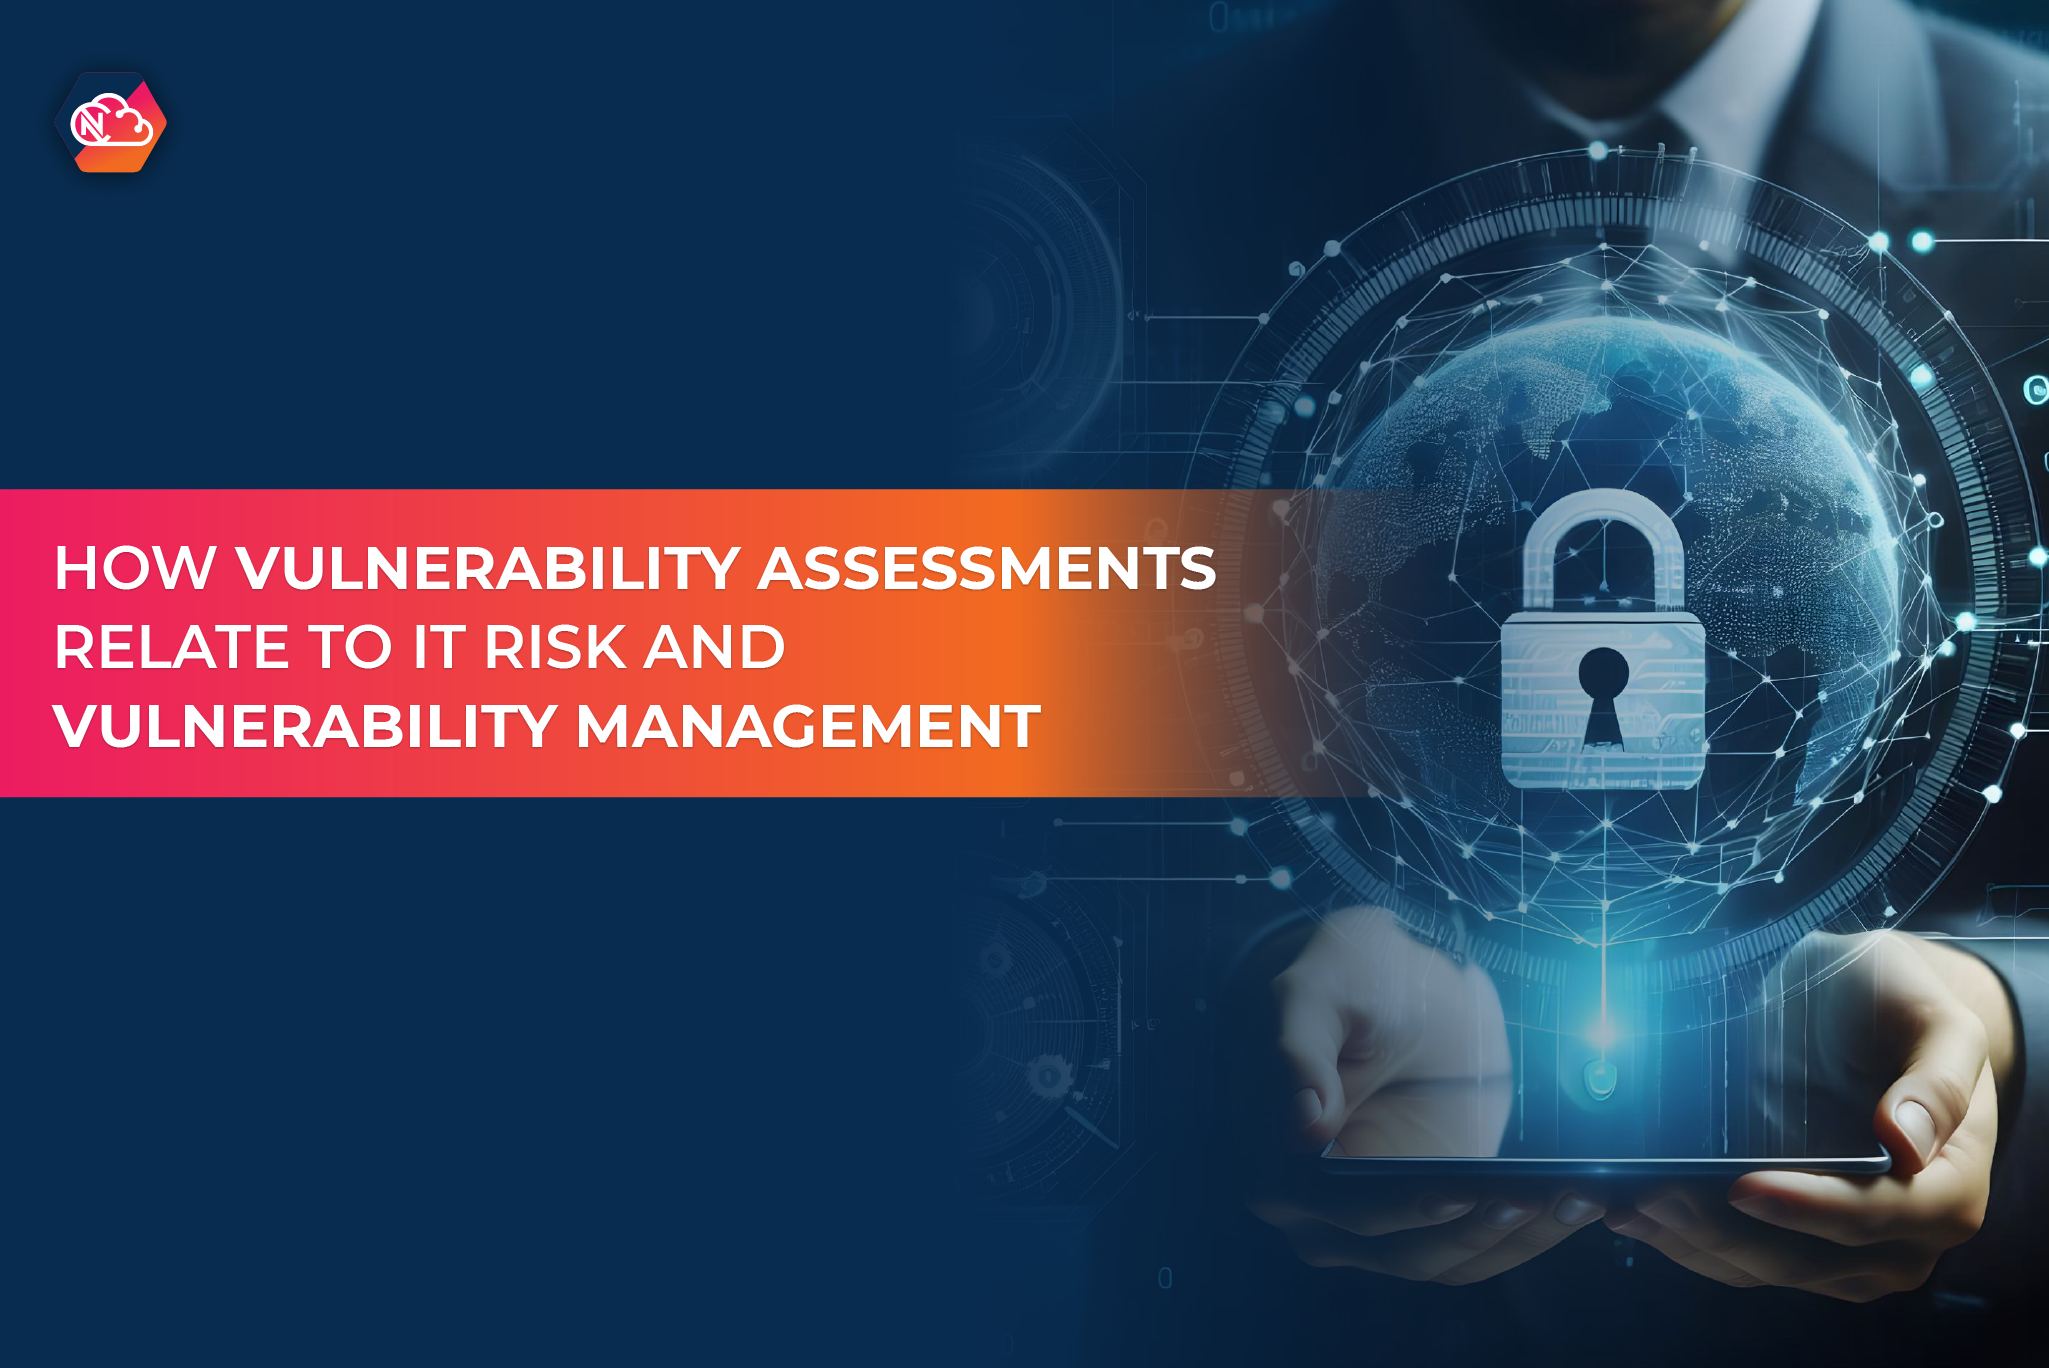 How Vulnerability Assessments Relate to IT Risk and Vulnerability Management